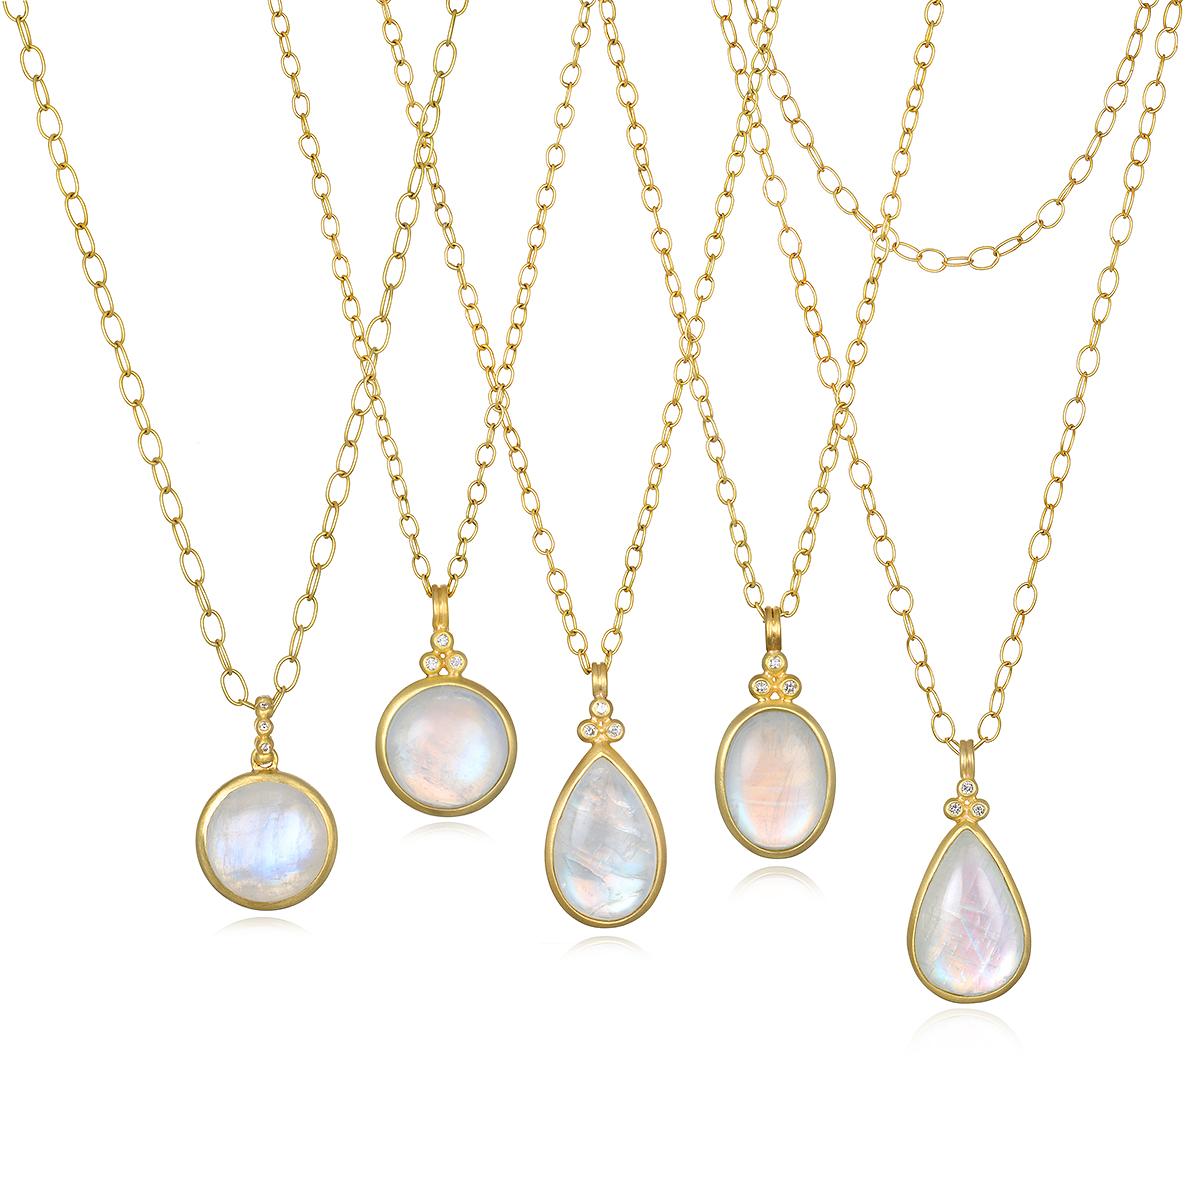 This beautiful Faye Kim Triple Diamond Oval Moonstone Bezel Pendant is full of light and reflects beautiful translucent blue hues. The shape, polish, and matte gold finish enhances the moonstone's striking rainbow effect. Handcrafted in 18 karat